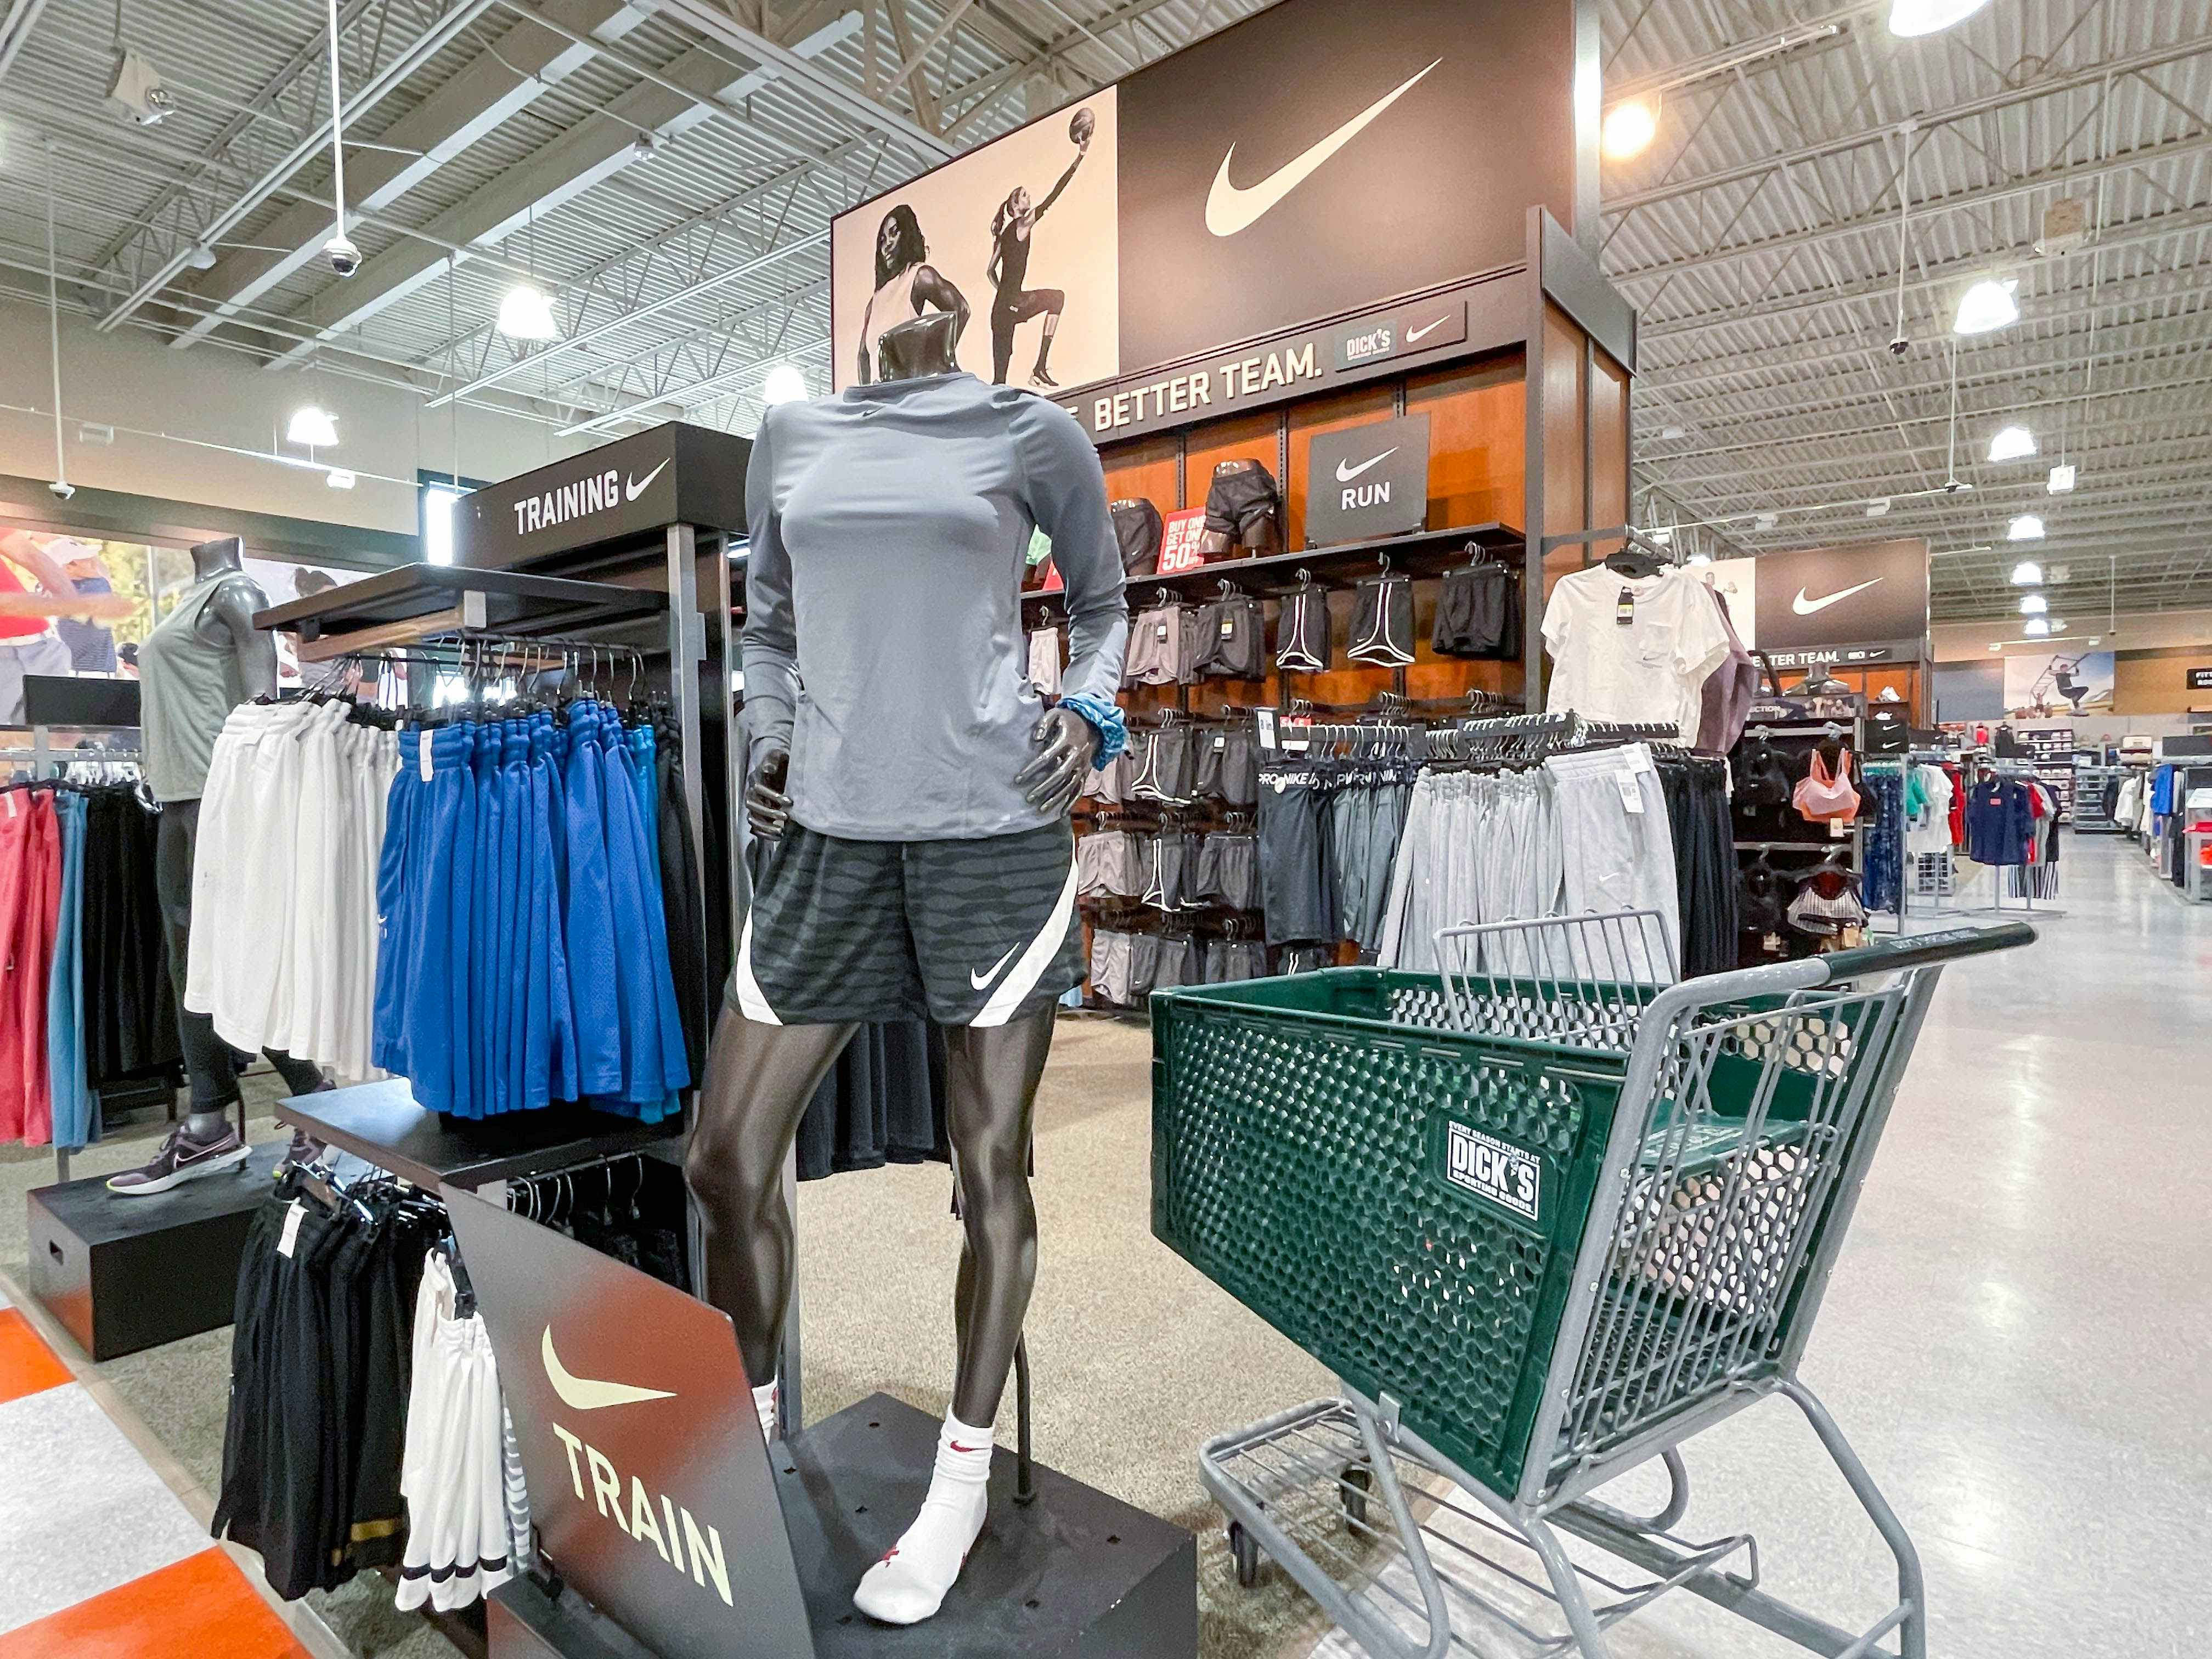 The Nike clothing section at Dicks Sporting Goods